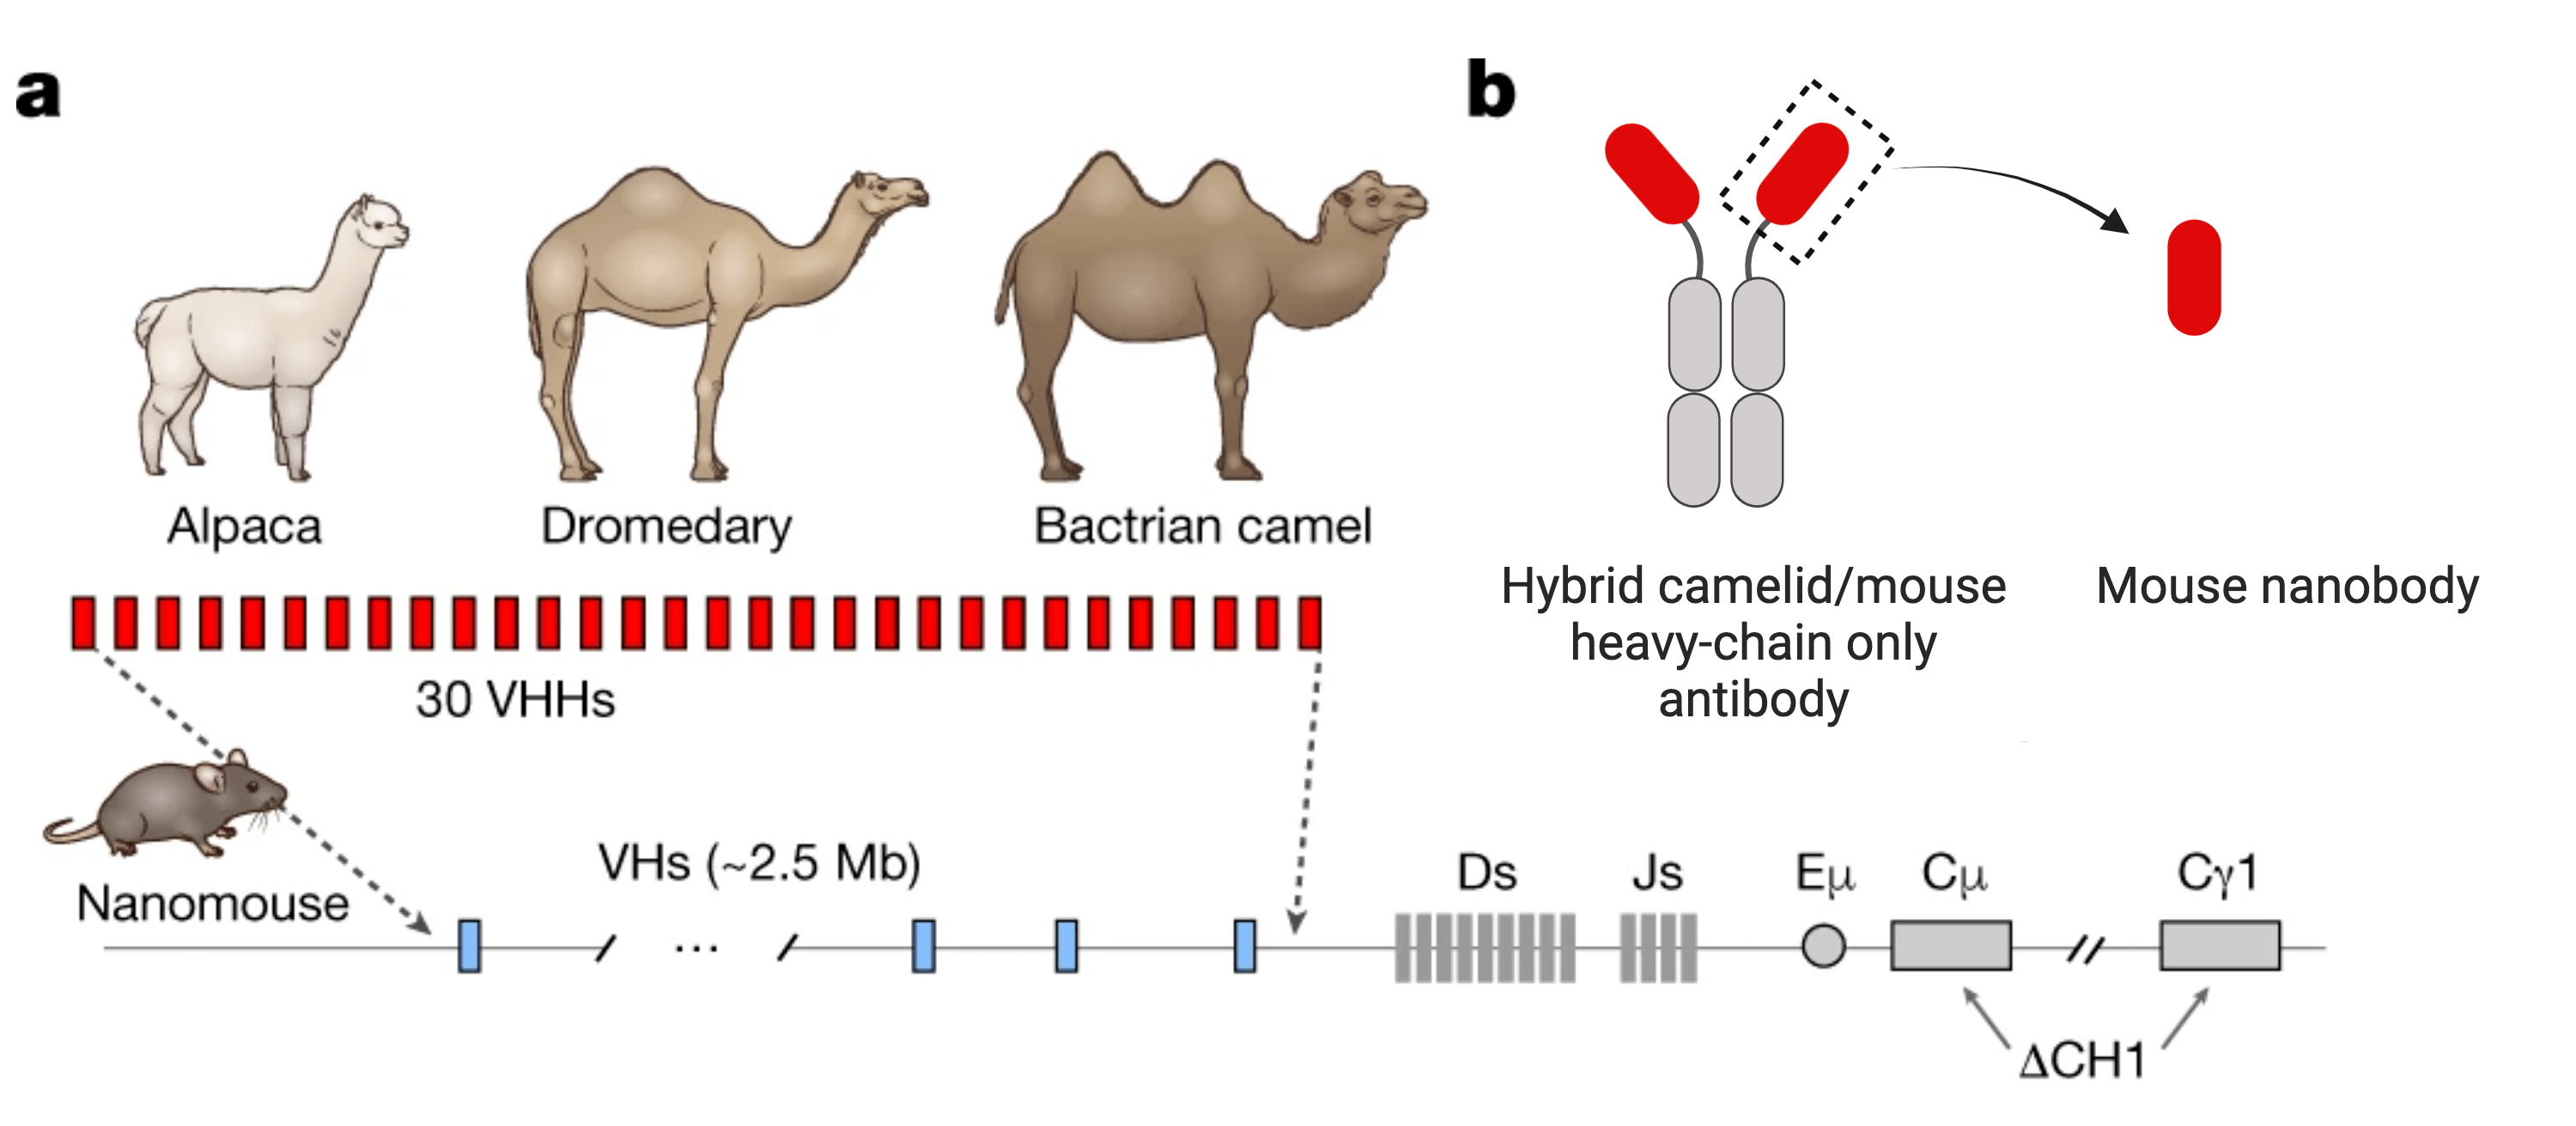 (A) Diagram summarizing the genetic modifications made to generate the nanomouse. The modifications include insertion of 30 VHH genes from different camelid species and mutation of two endogenous heavy chain genes to promote expression of heavy chain only antibodies. VHH genes encode the variable domains of heavy-chain only antibodies. (B) Hybrid camelid/mouse heavy-chain only antibodies are composed of the mouse Fc constant domains and a camelid variable domain, which is the source of the nanomouse-derived nanobodies. 